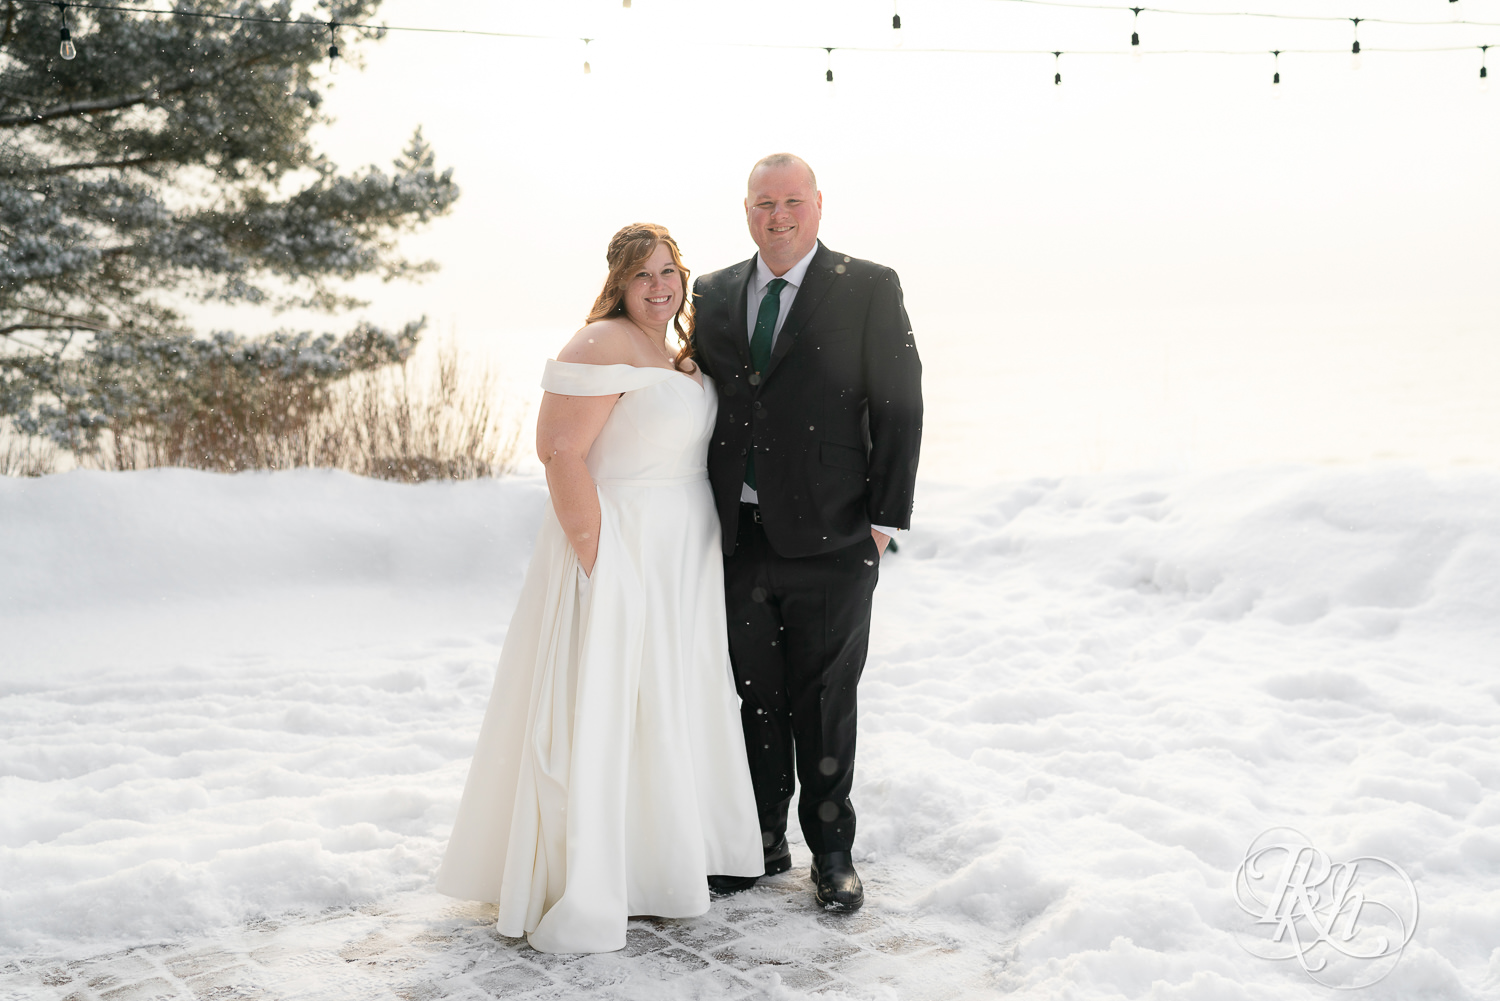 Bride and groom smiling in the snow at Grand Superior Lodge in Two Harbors, Minnesota.